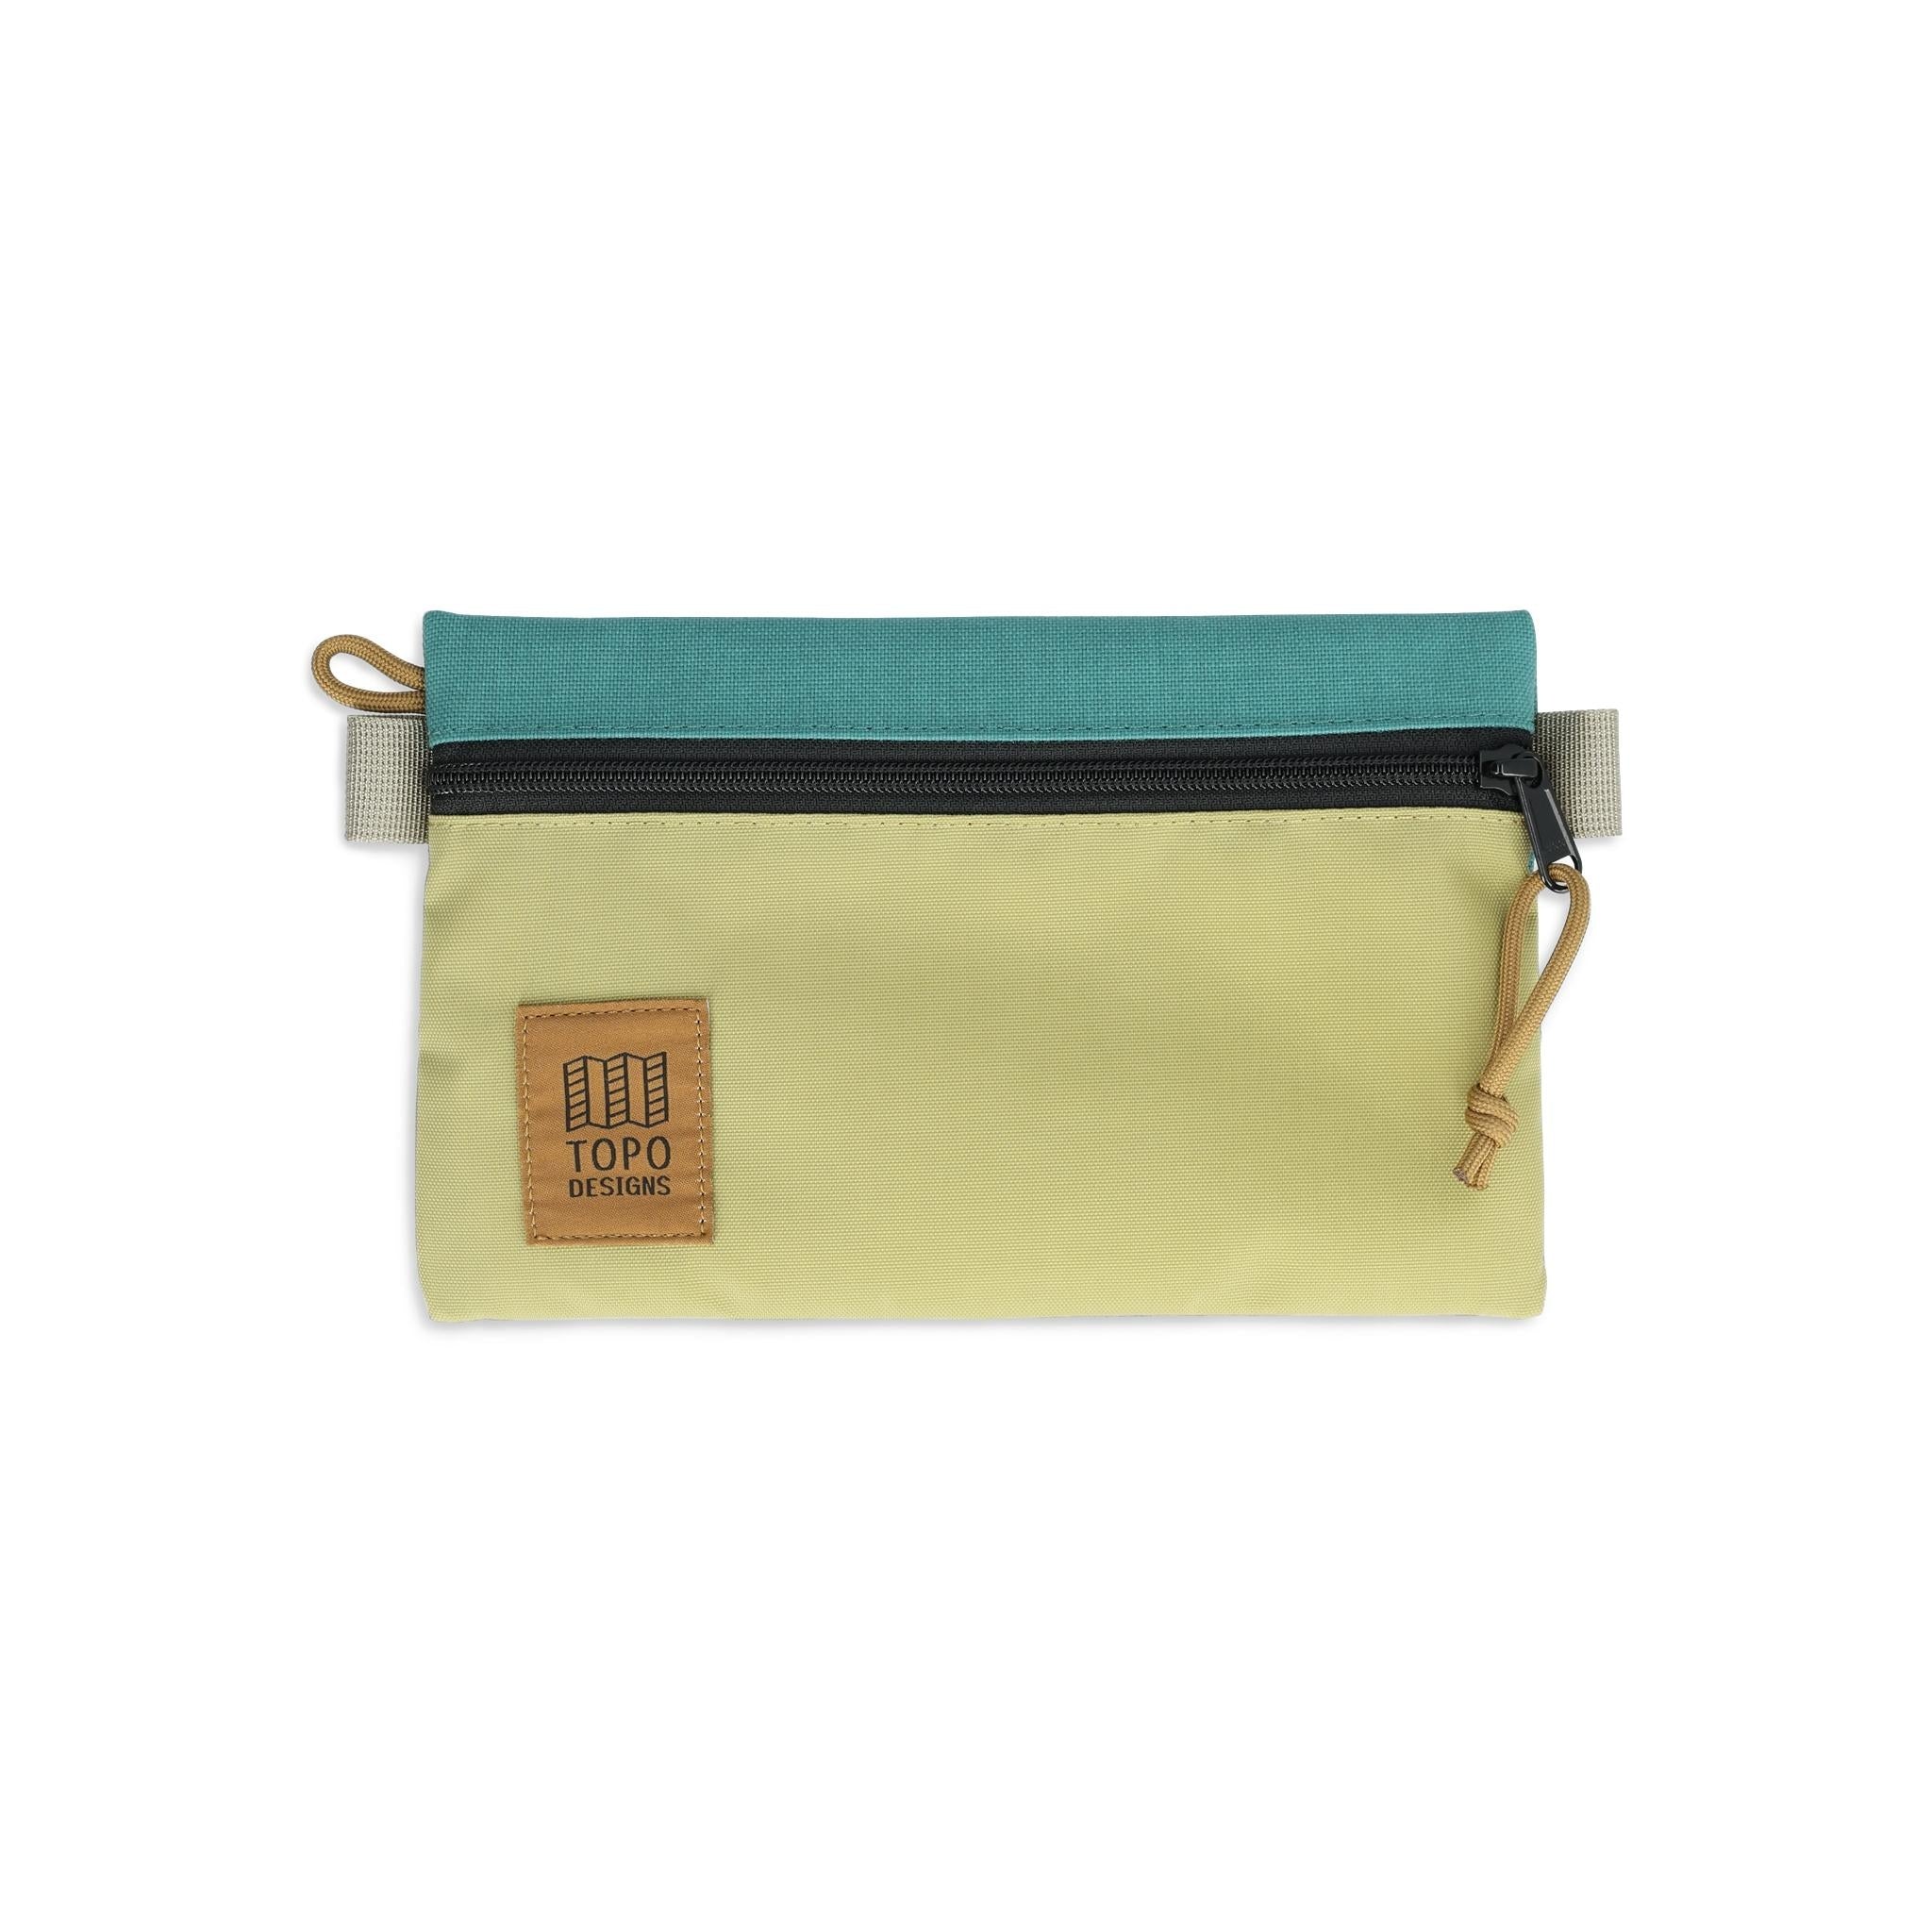 Front View of Topo Designs Accessory Bags in "Small" "Caribbean / Moss"